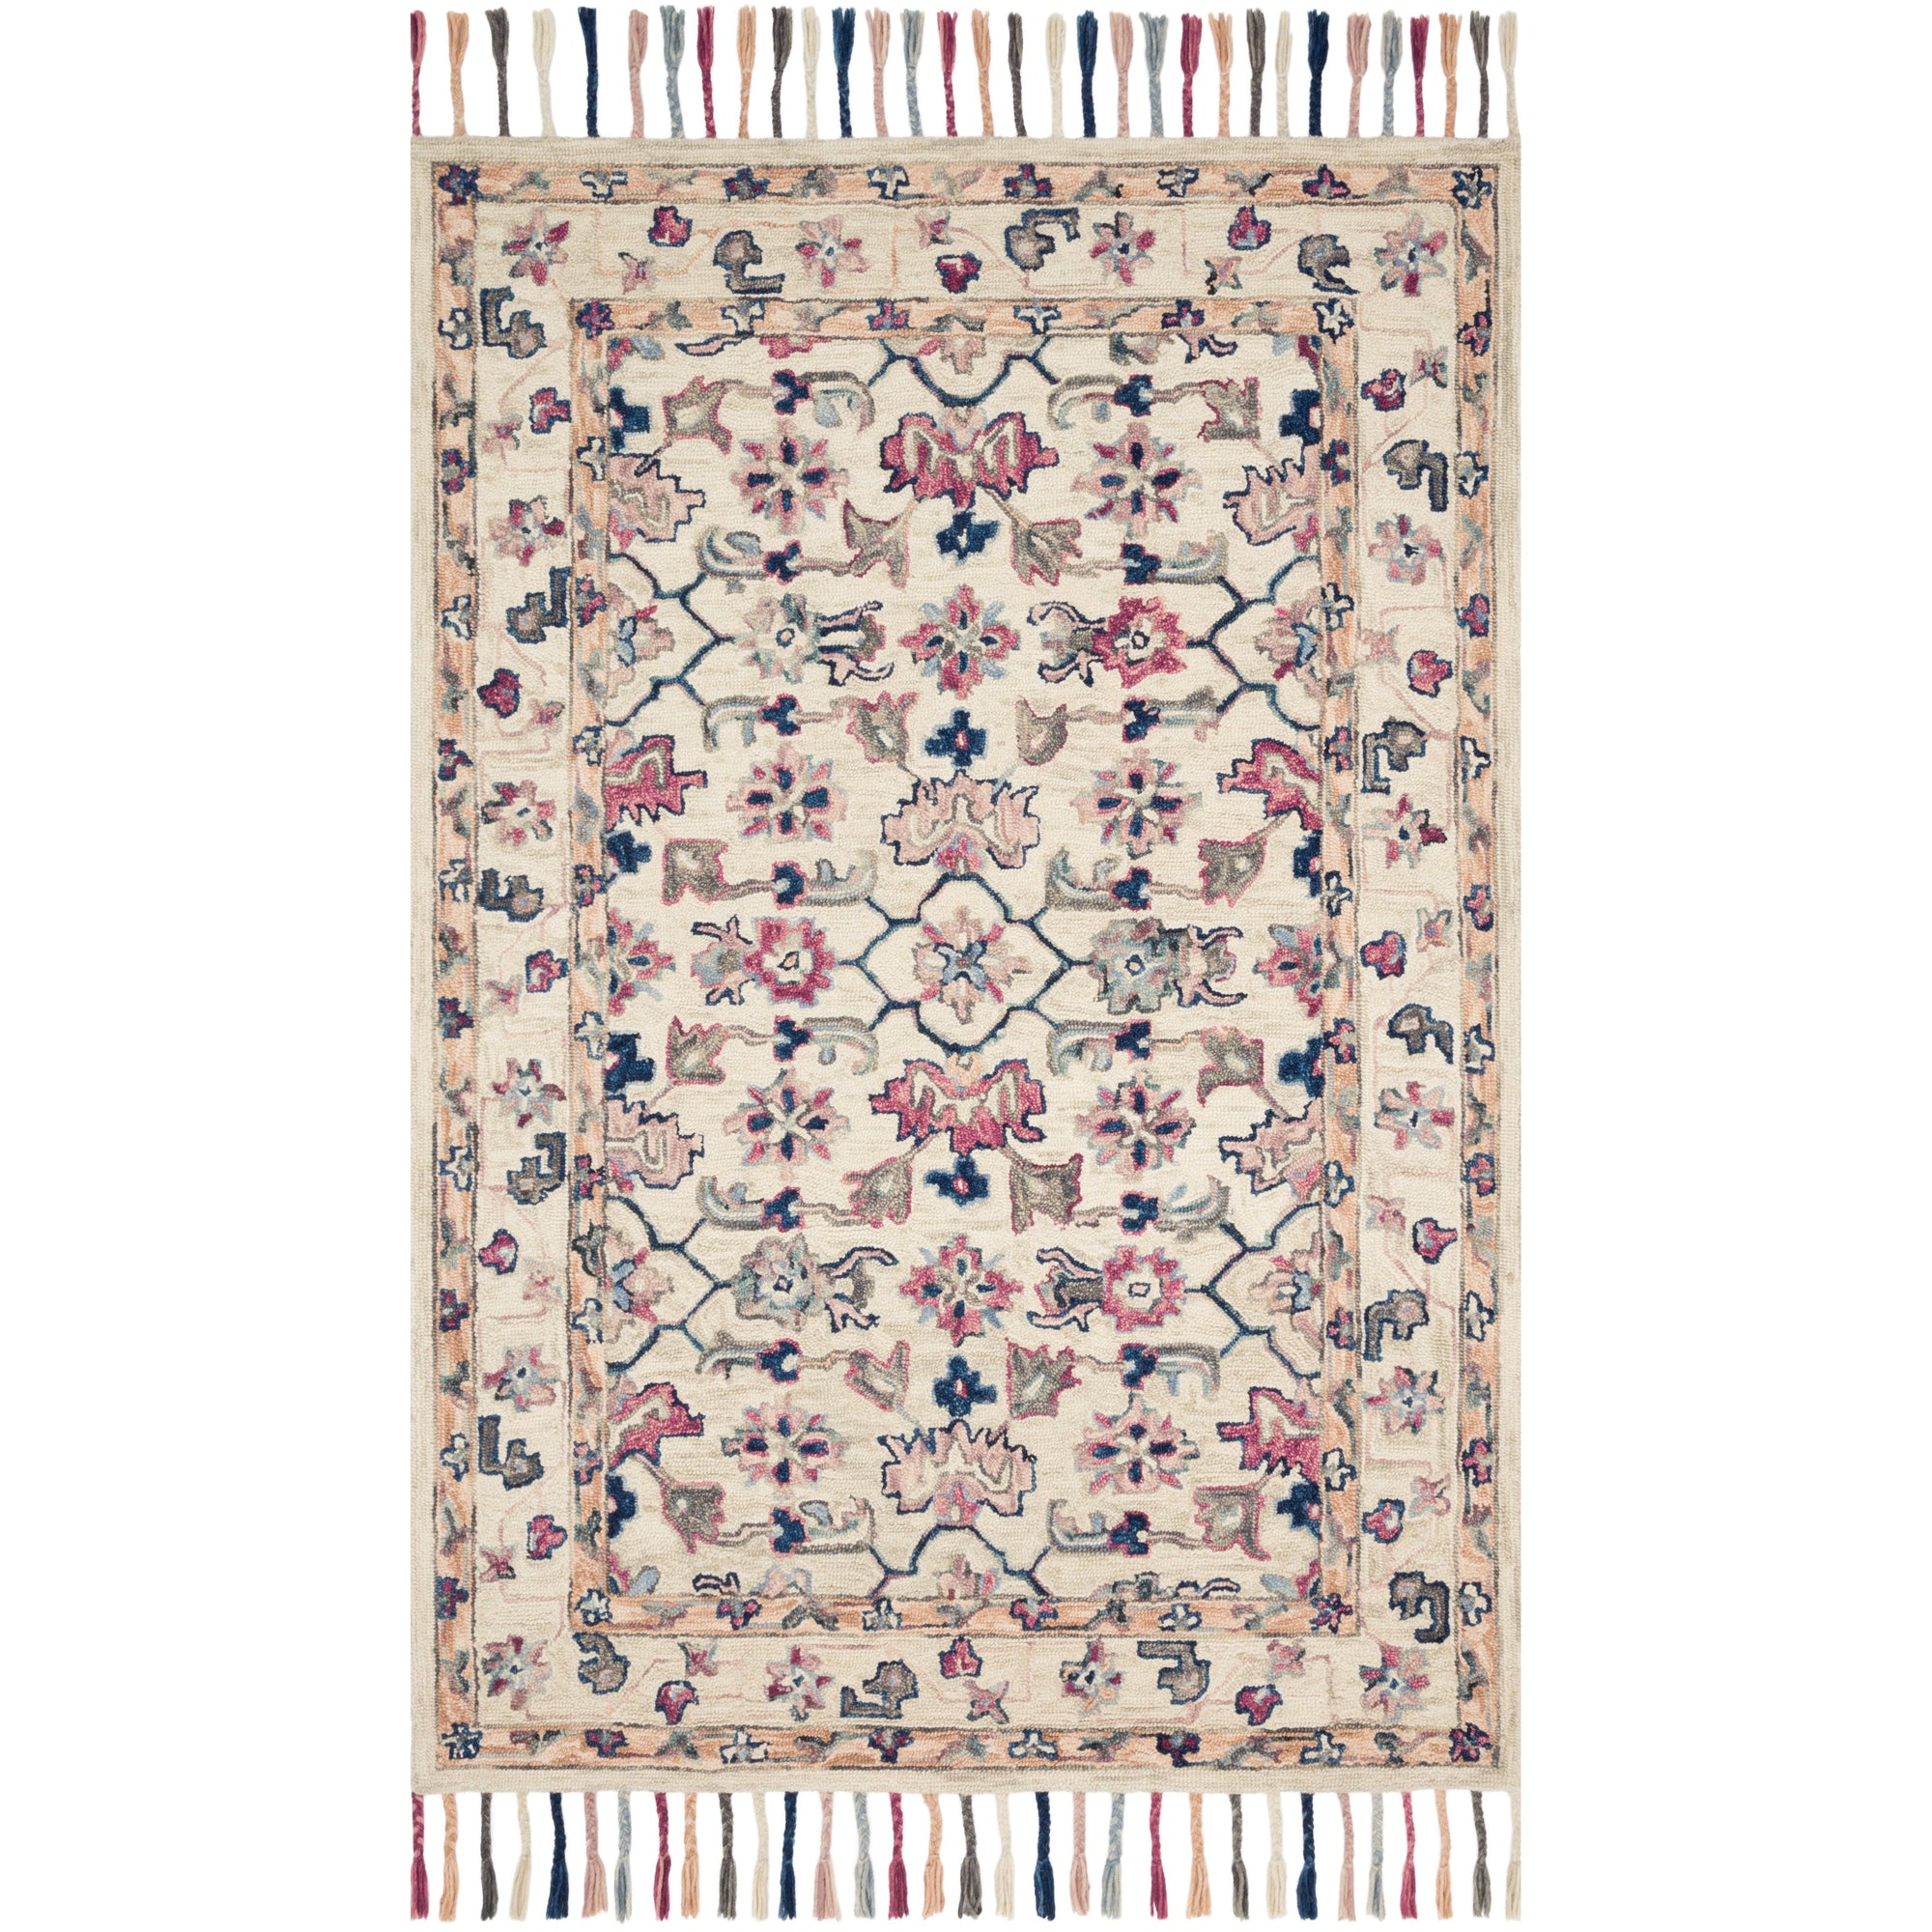 Rugs by Roo Loloi Elka Ivory Multi Area Rug in size 18" x 18" Sample